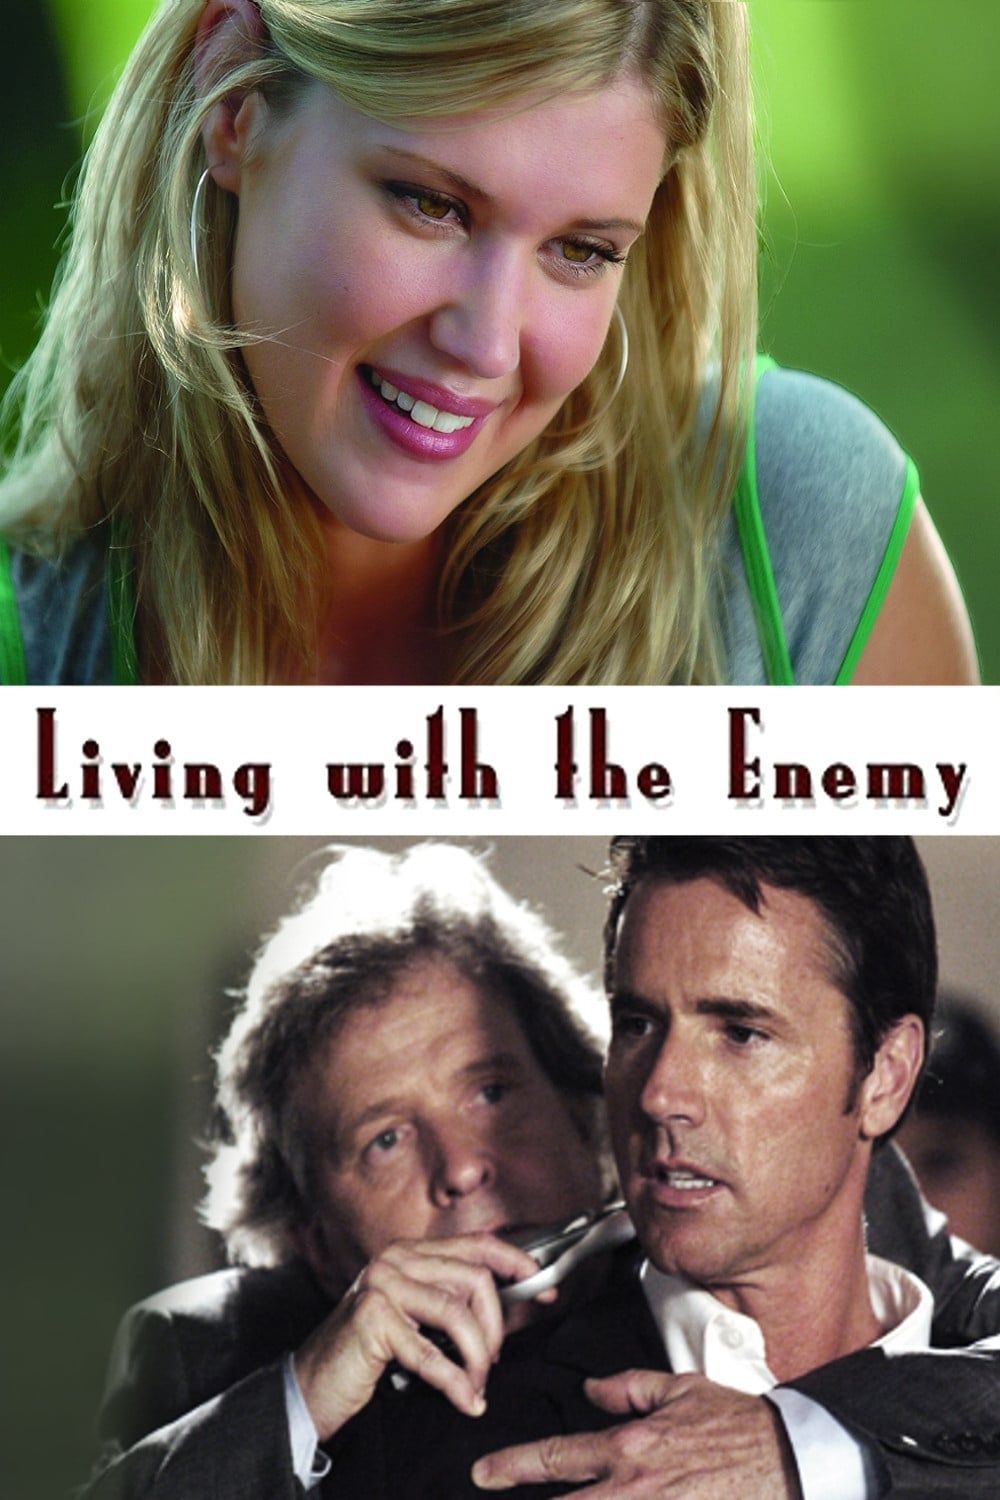 How to watch and stream Living With the Enemy - 2005 on Roku